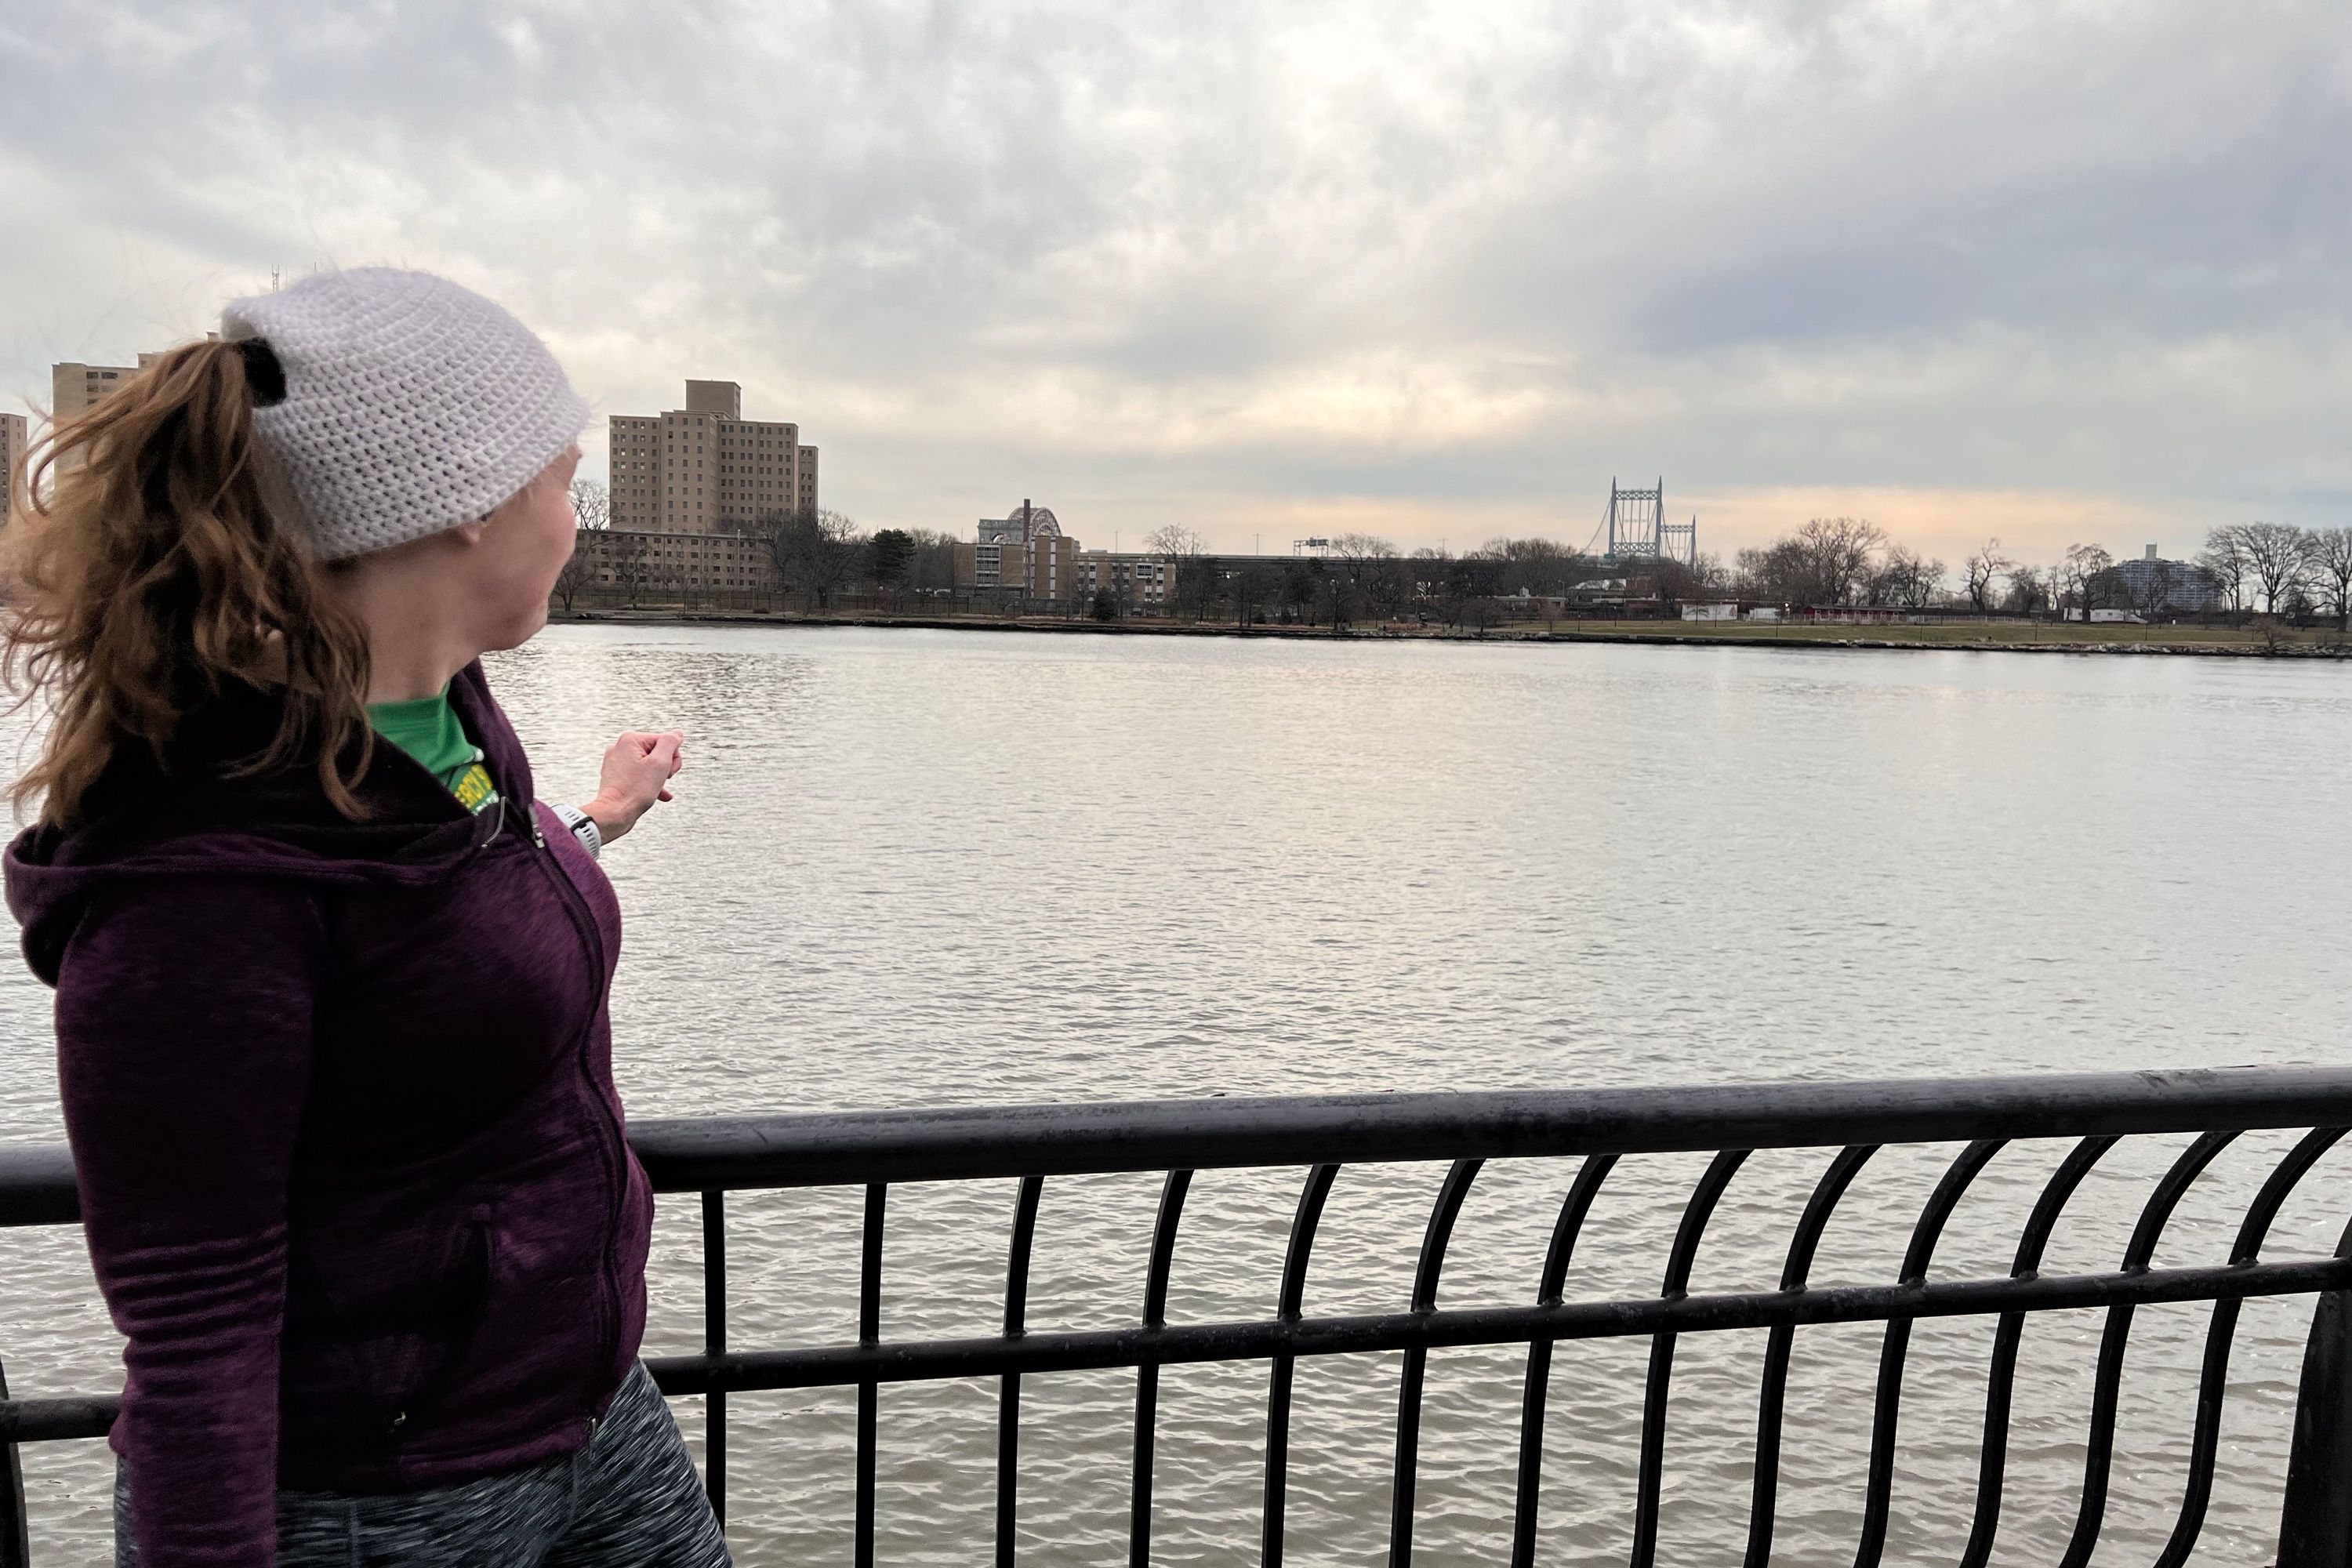 Aimee Parow looks over the Harlem River along the Bobby Wagner Walk.